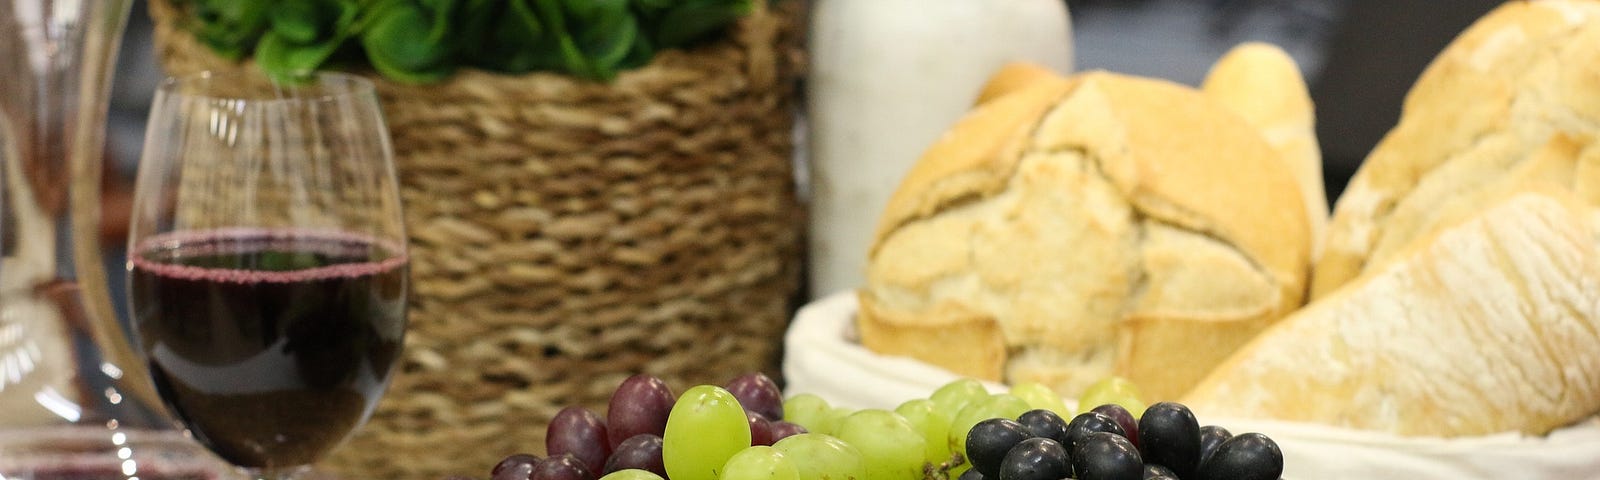 Picture of wine, grapes and bread